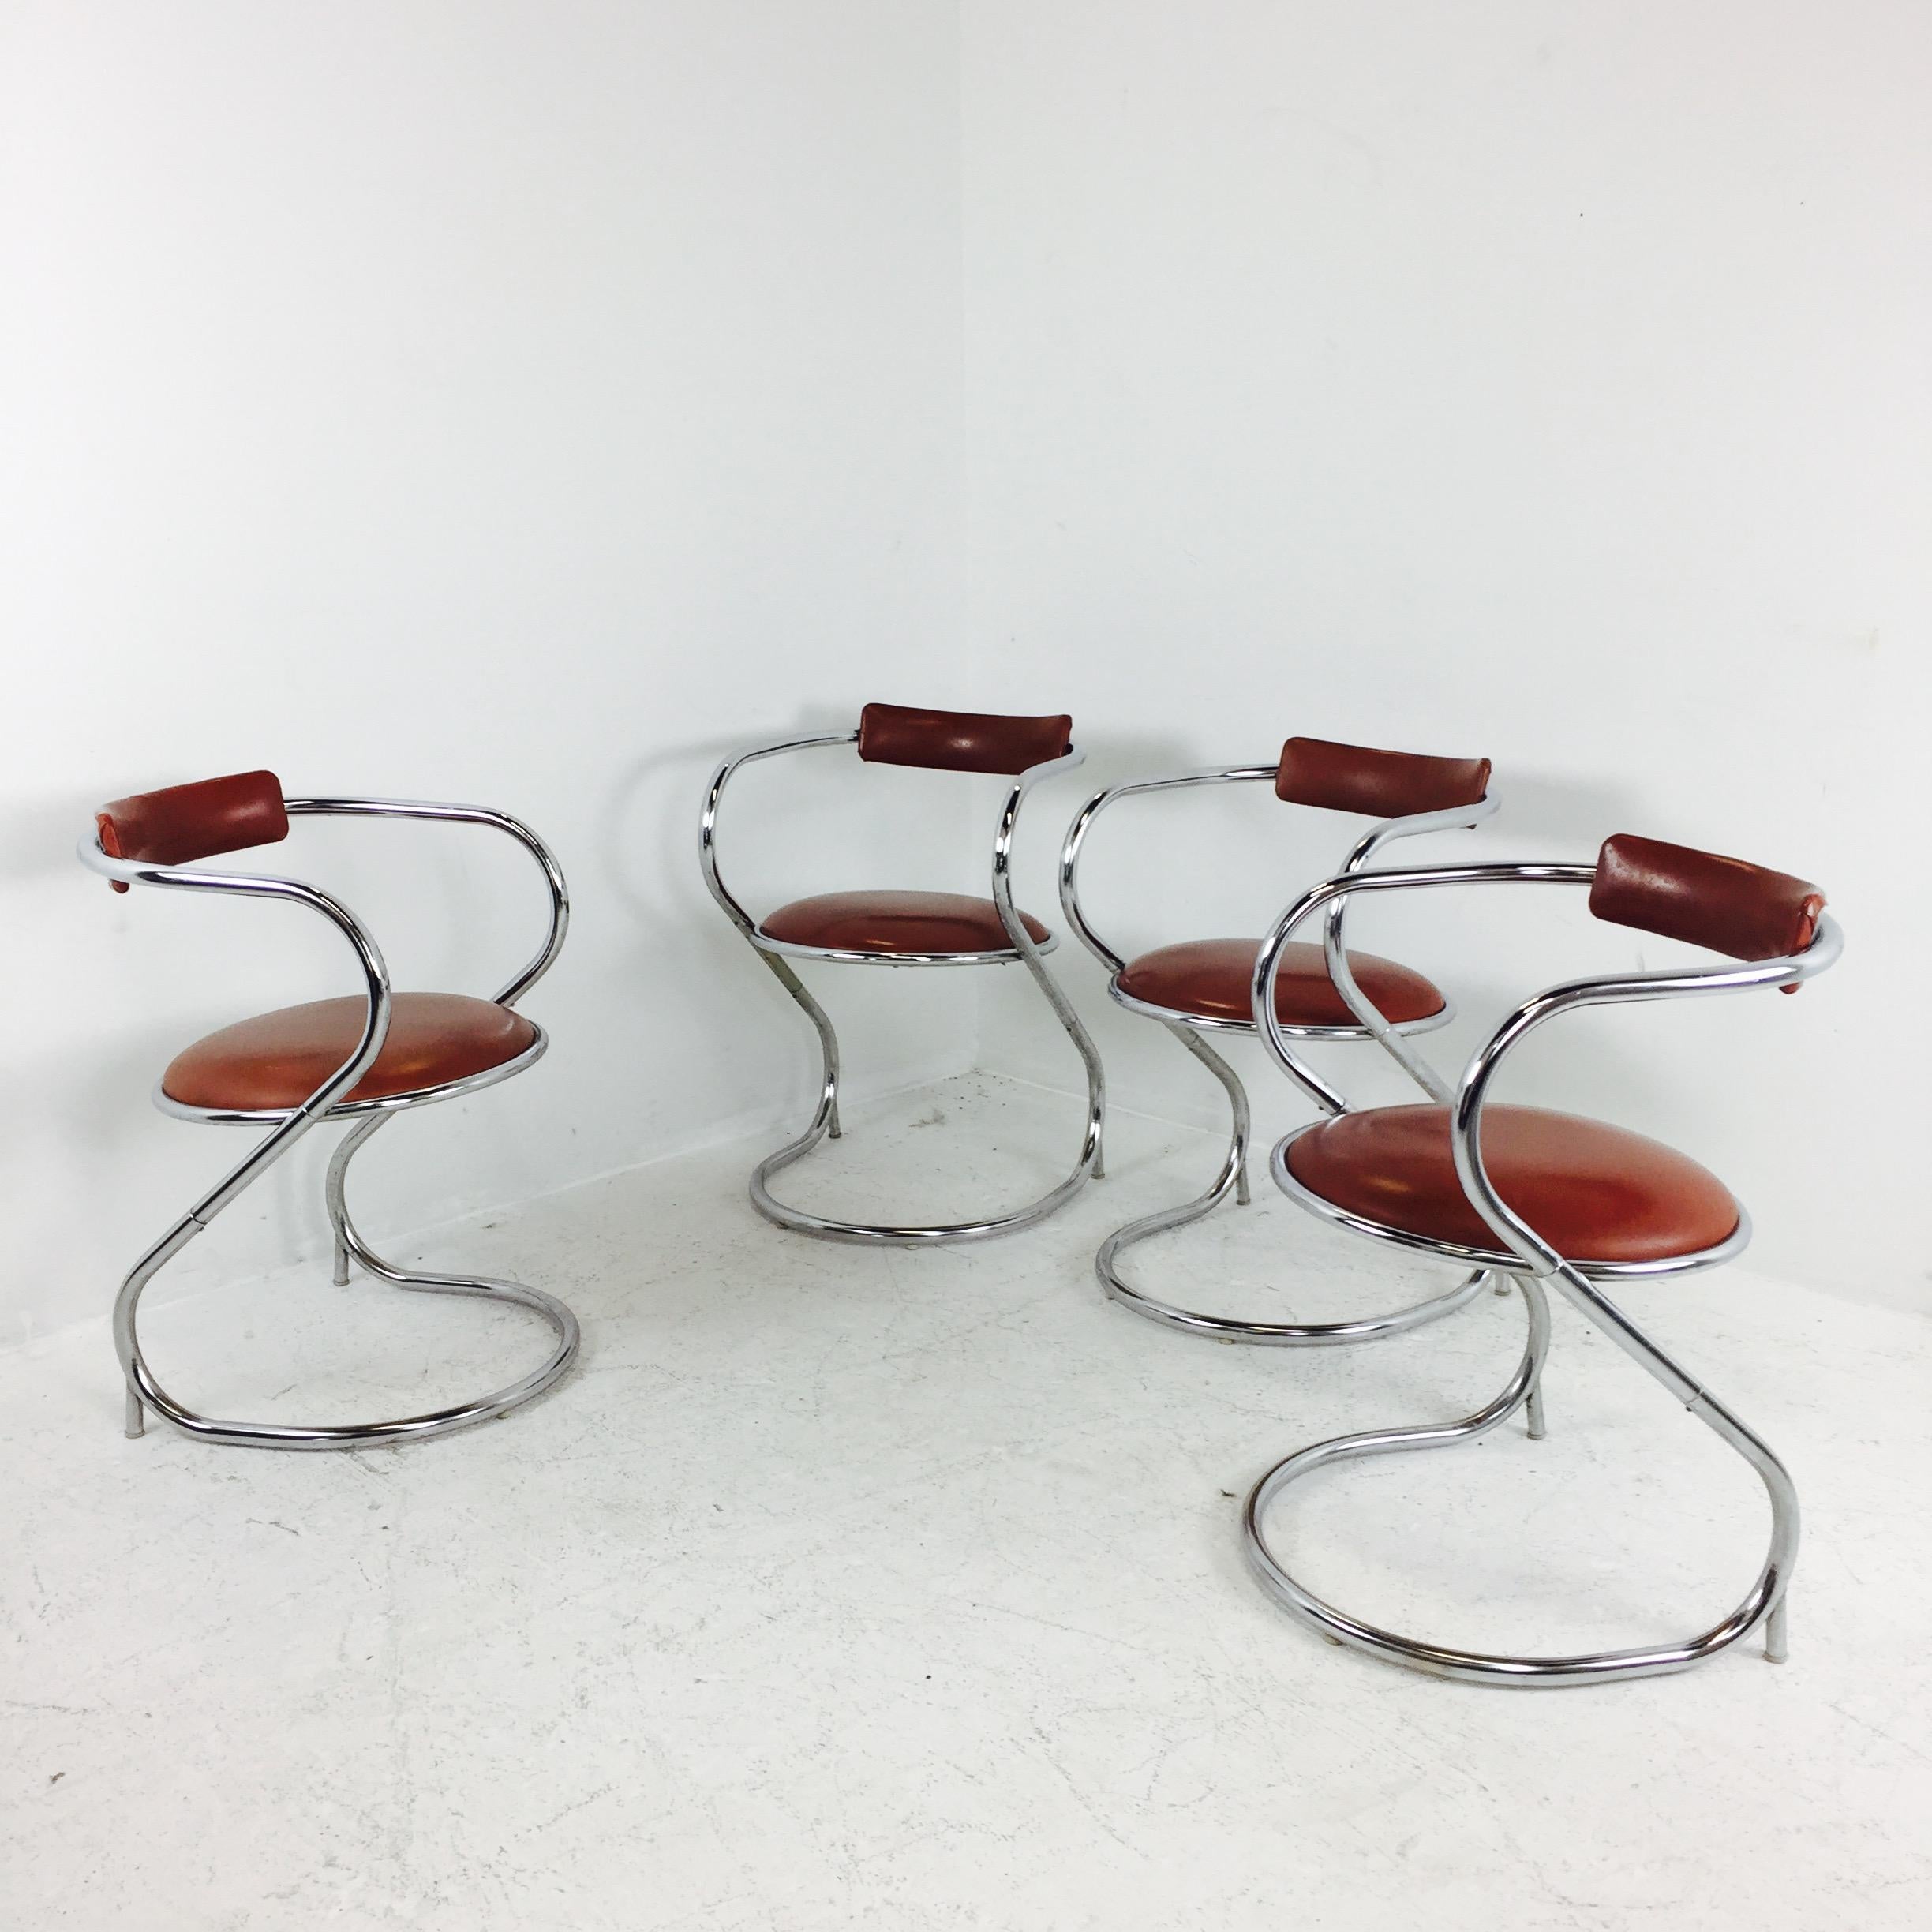 Set of four vintage chrome cantilever dining chairs by Sutton Bridge Furniture. Chairs are in good condition with original vinyl upholstery. The chrome finish does need polishing.
Dimensions:
20